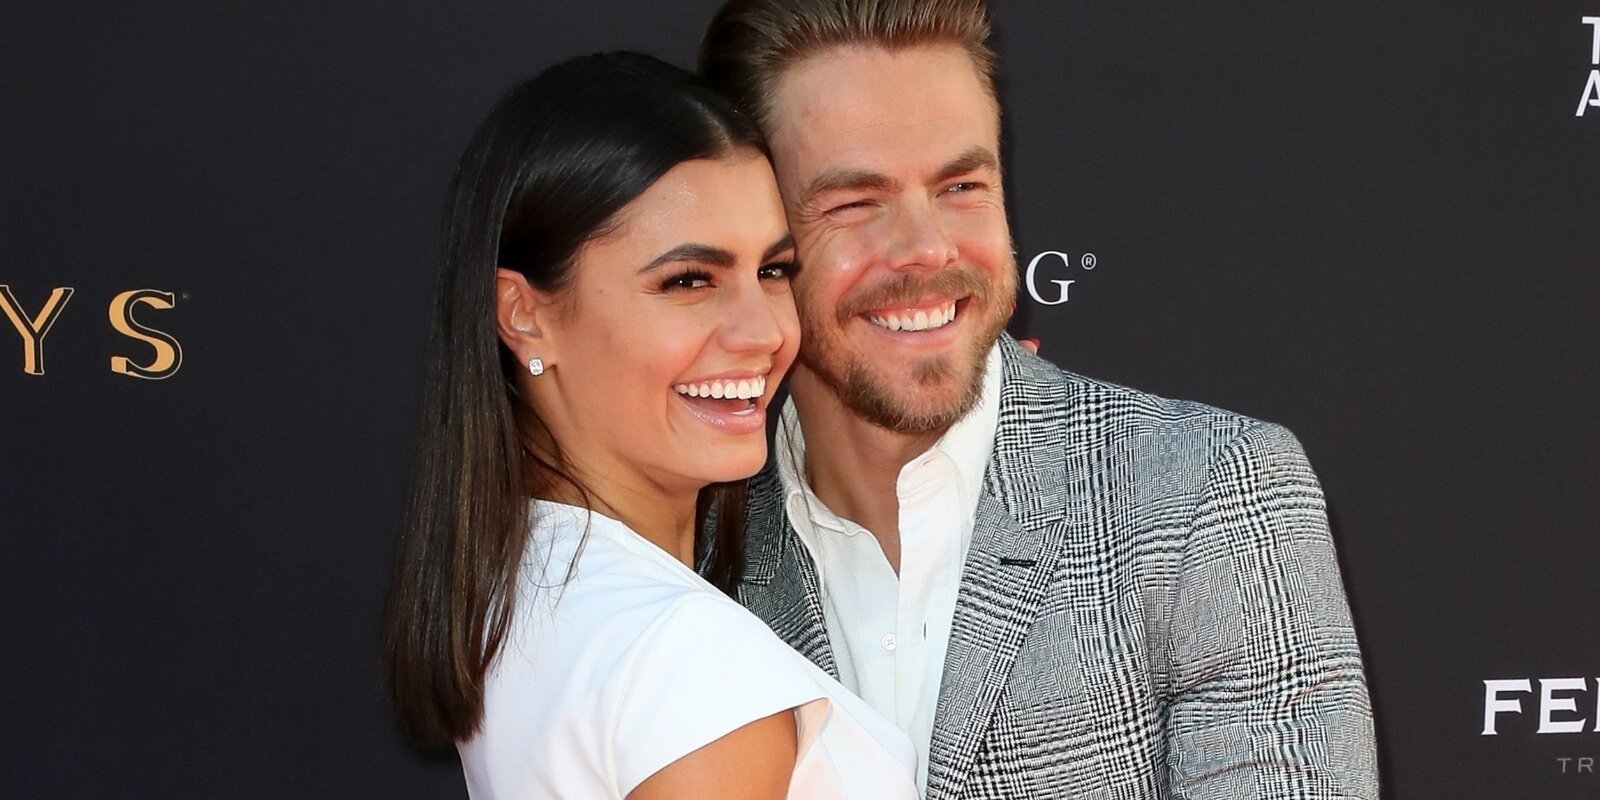 Hayley Erbert and Derek Hough smile during a red carpet event.